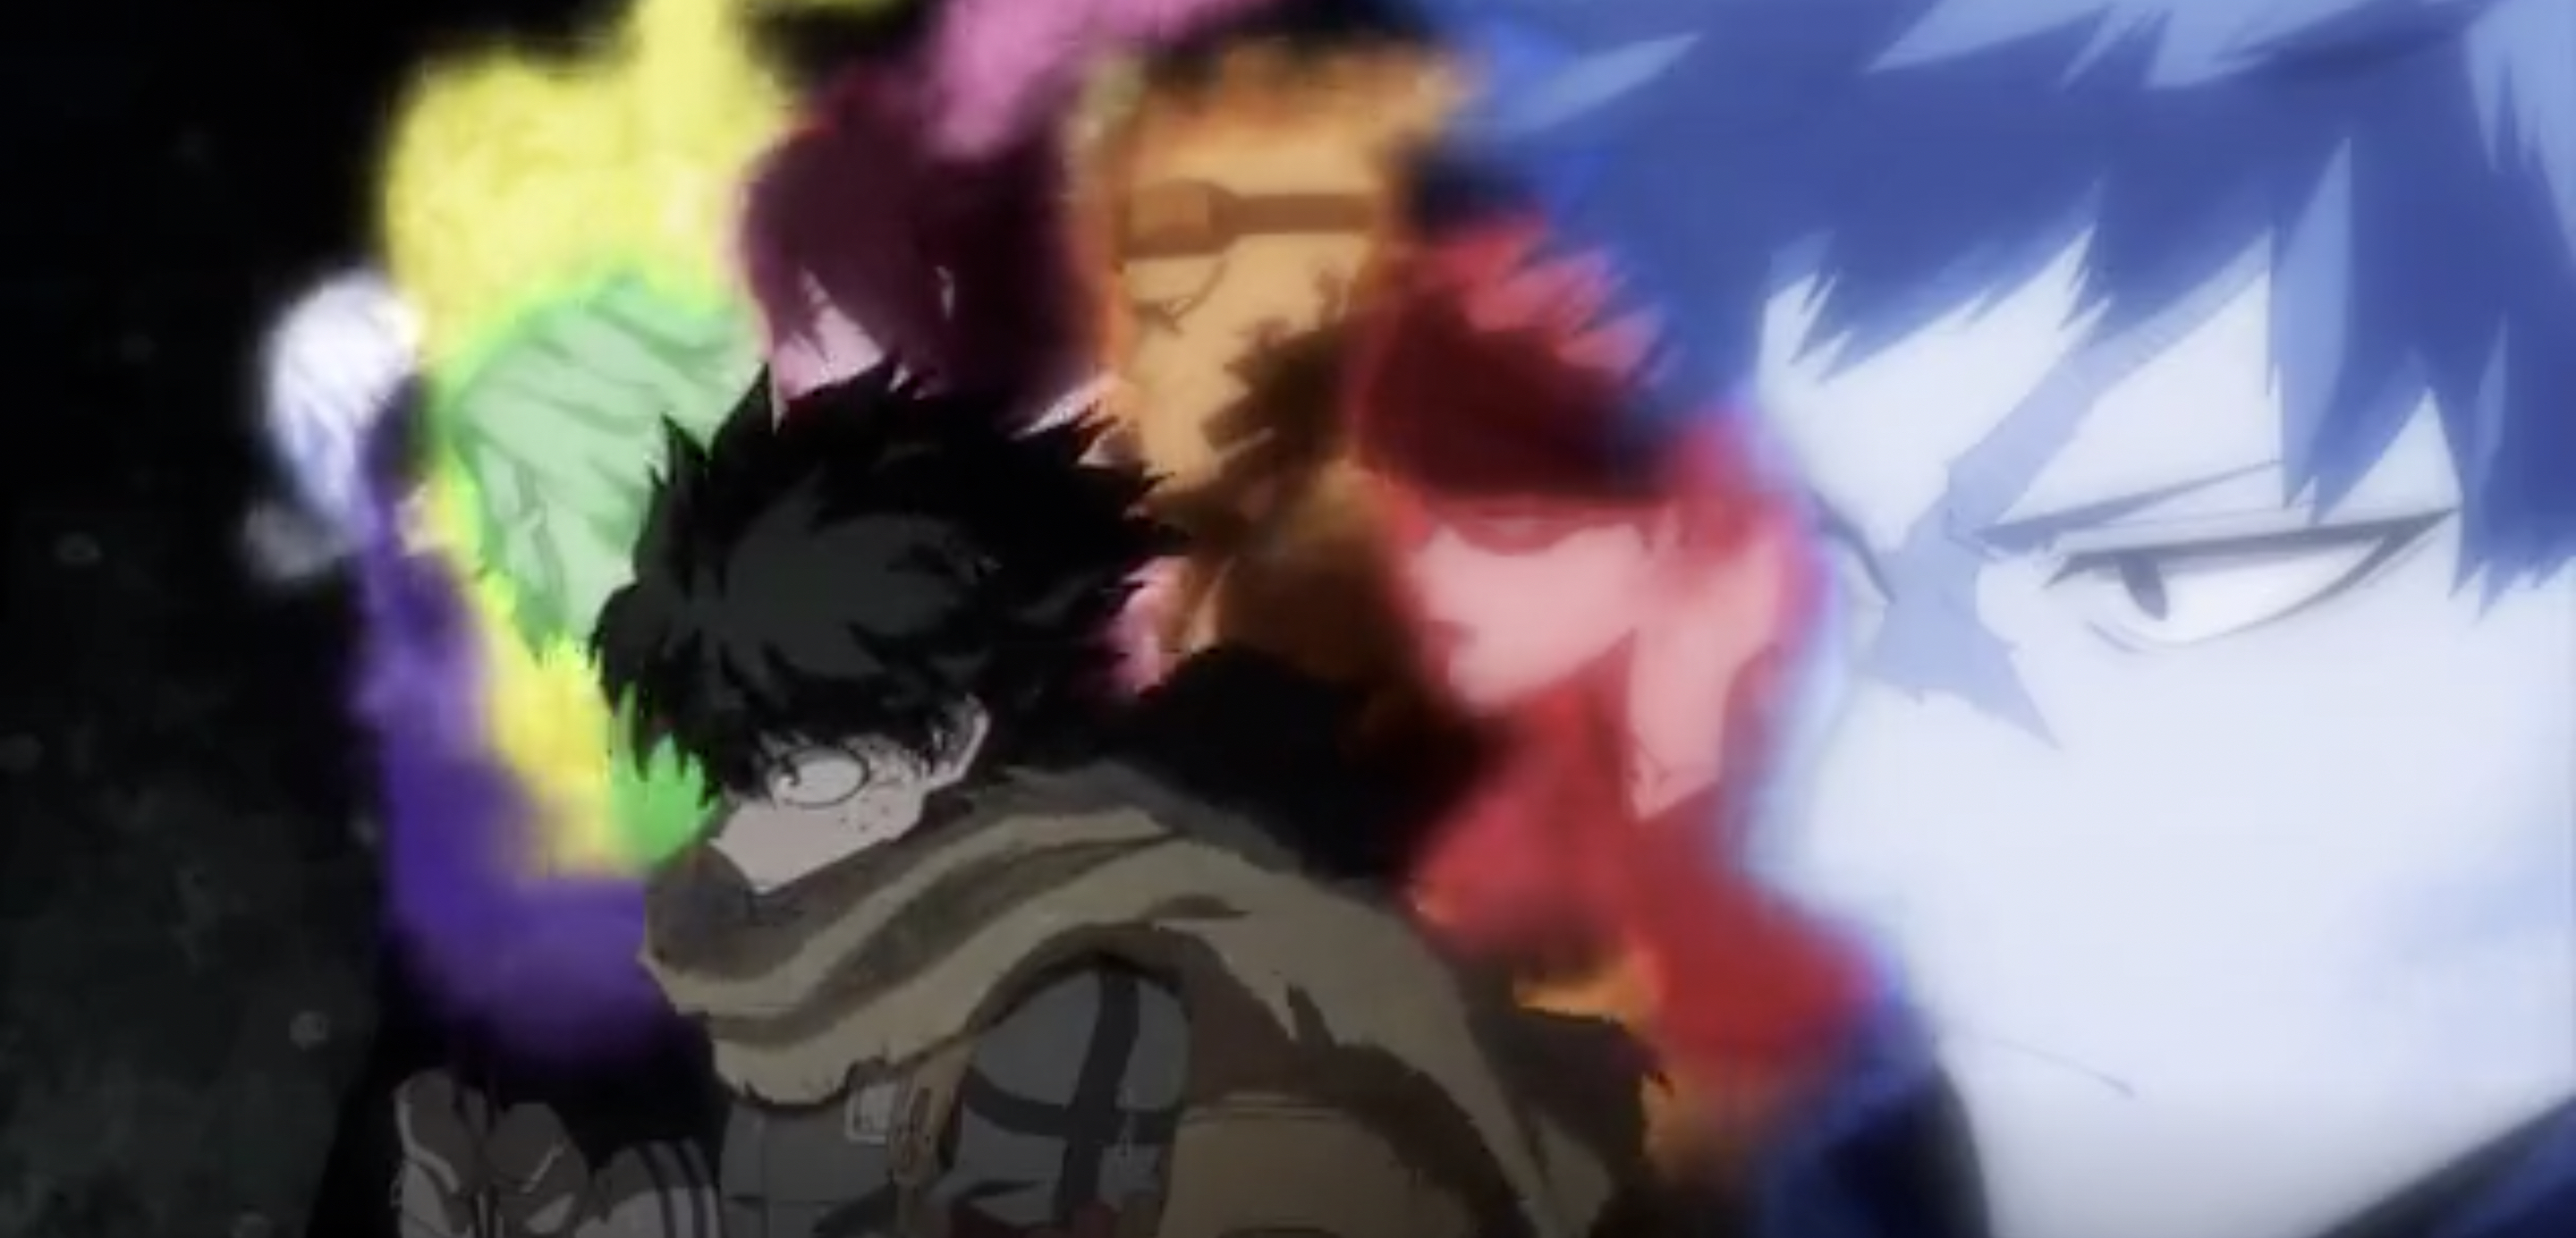 My Hero Academia's Massive Reveal Changes The Series' Lore Forever